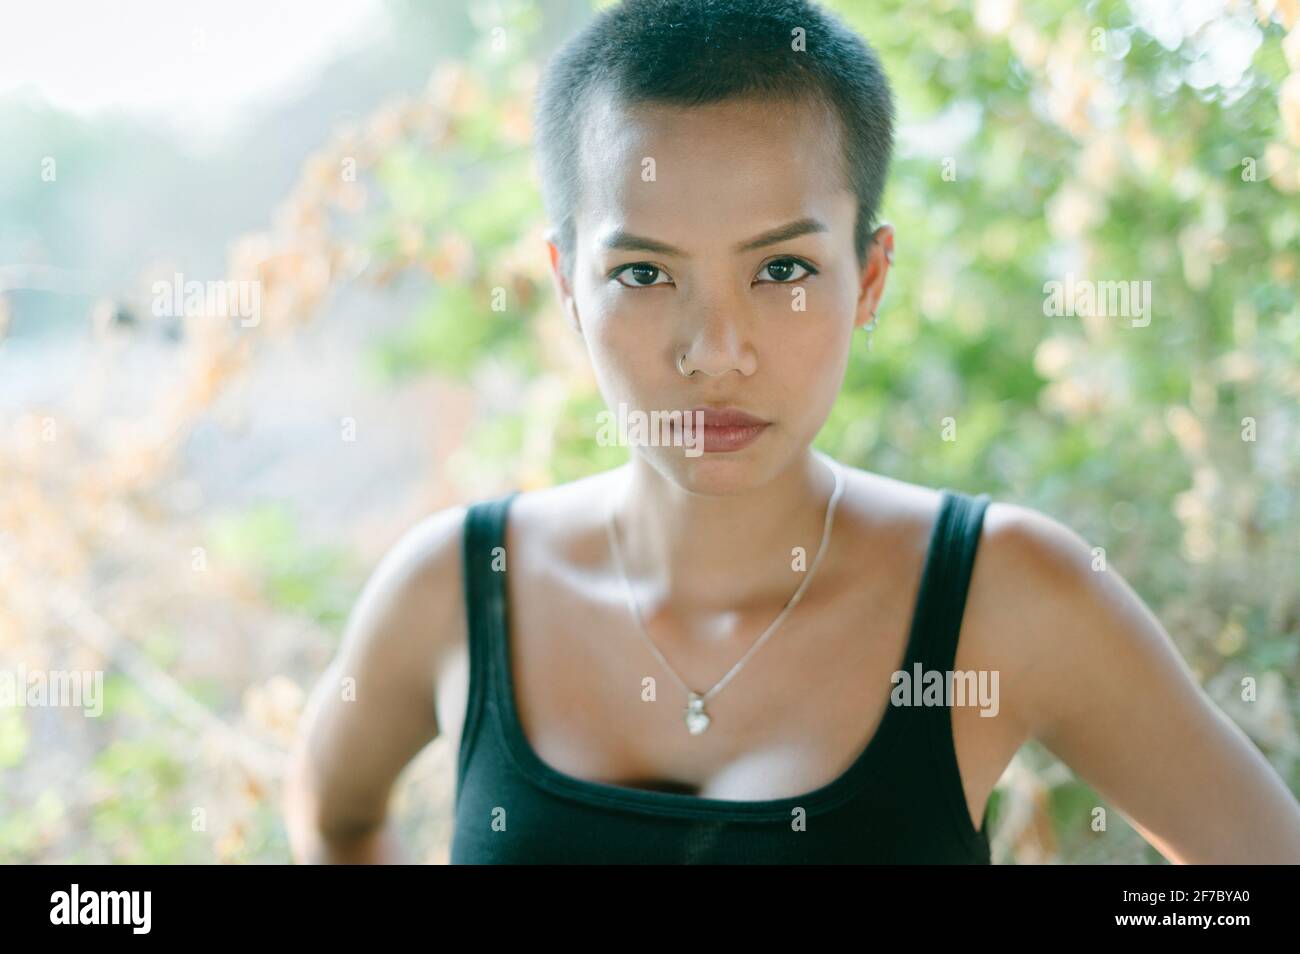 Headshot of a young Asian ethnicity woman with short hair, wearing a sports bra, looking at the camera. Stock Photo